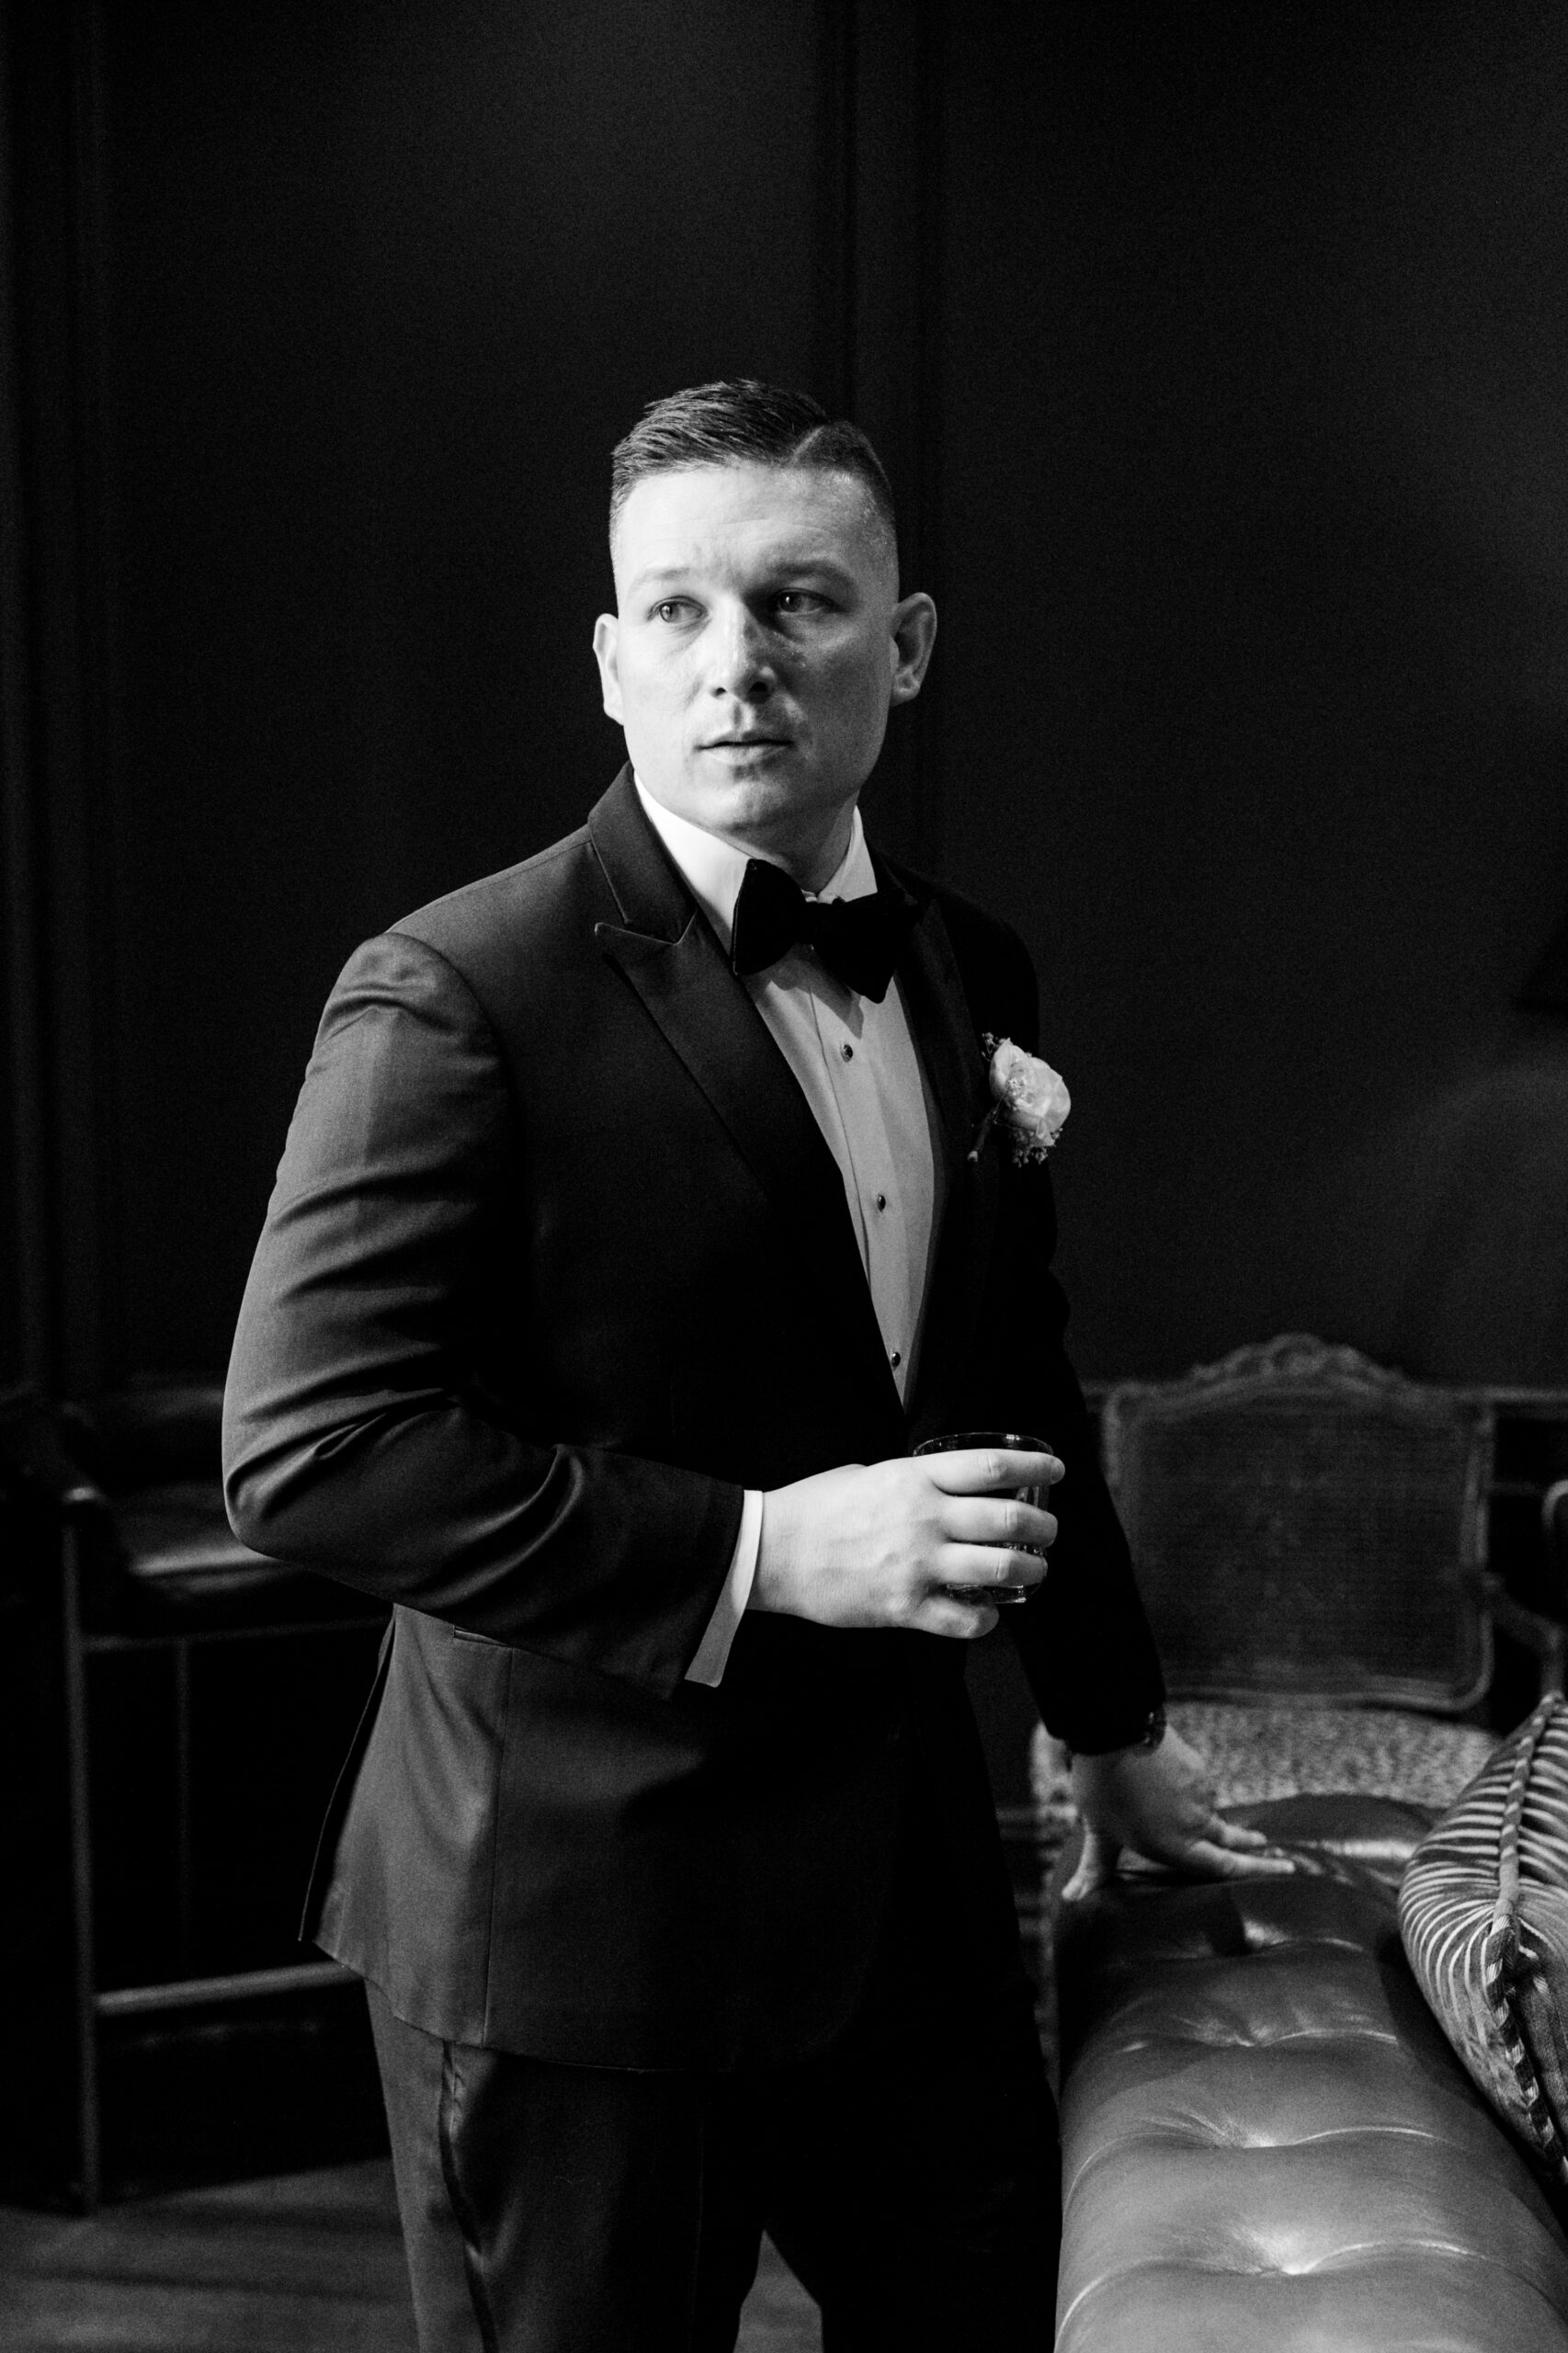 black and white classic groom portrait